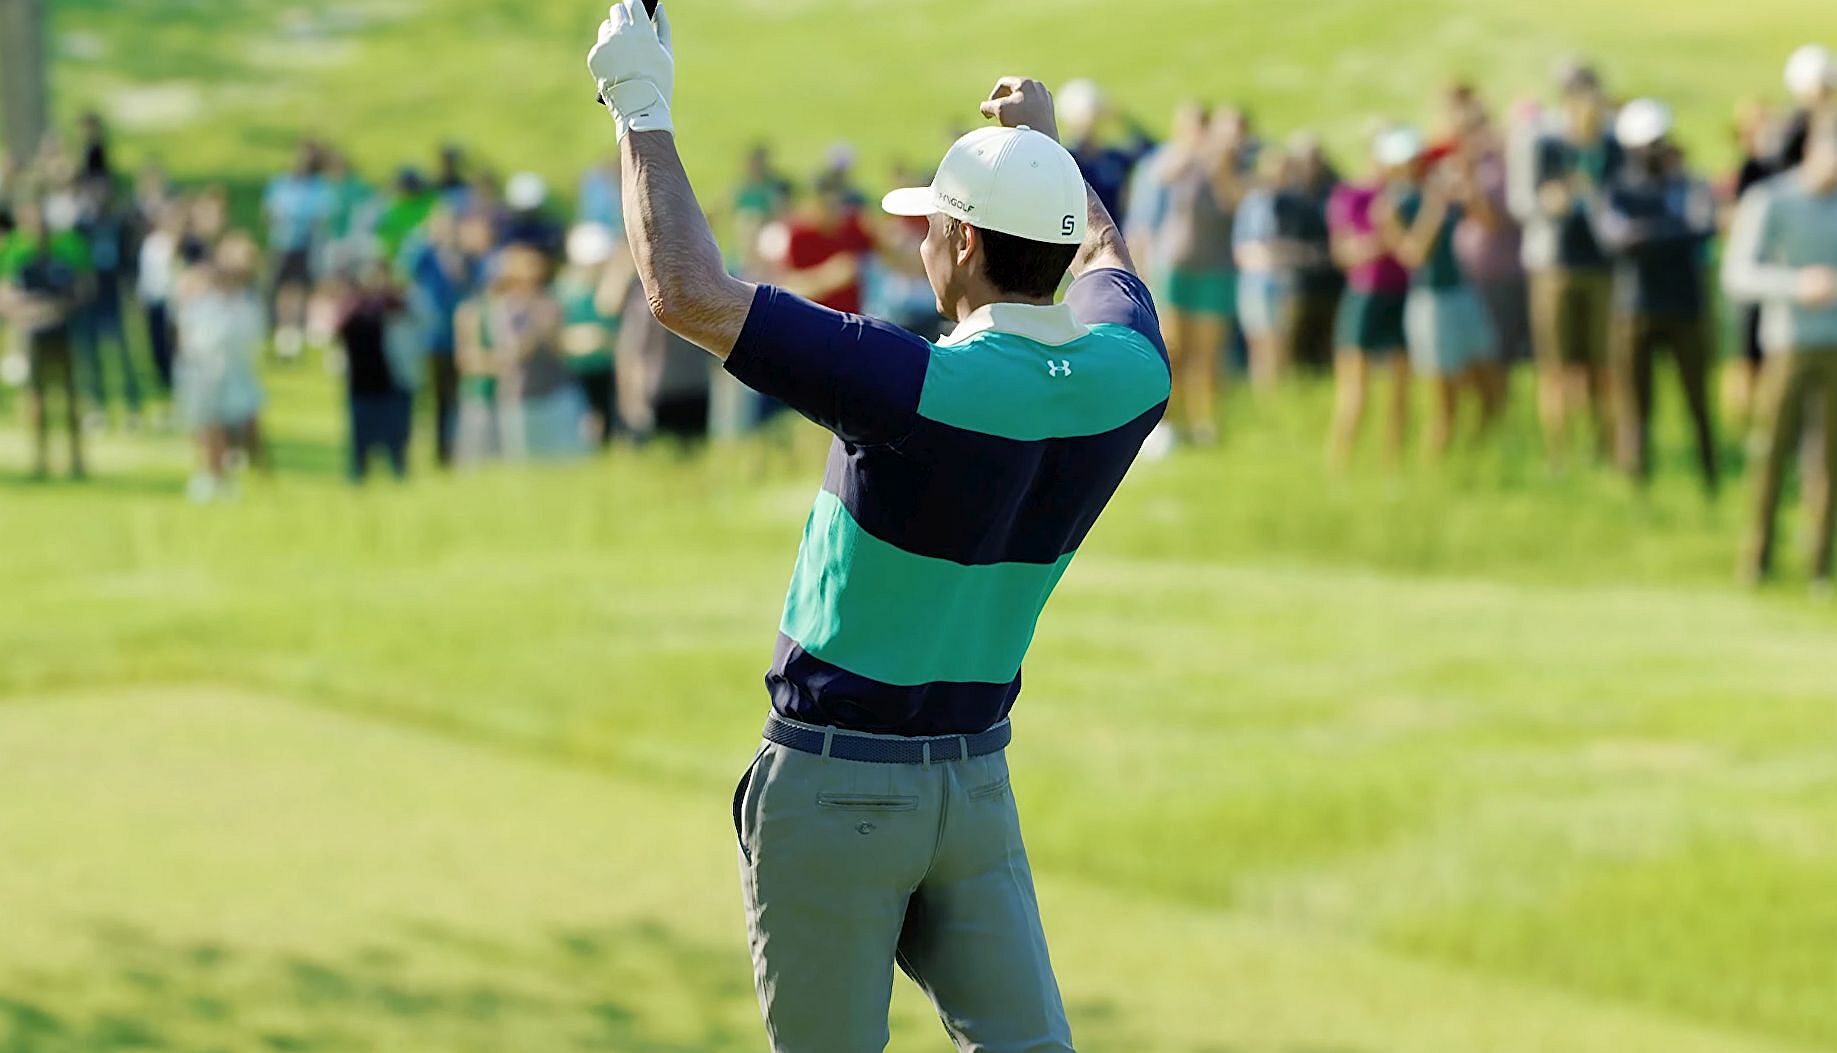 EA Sports PGA Tour gets a release date, new details shared